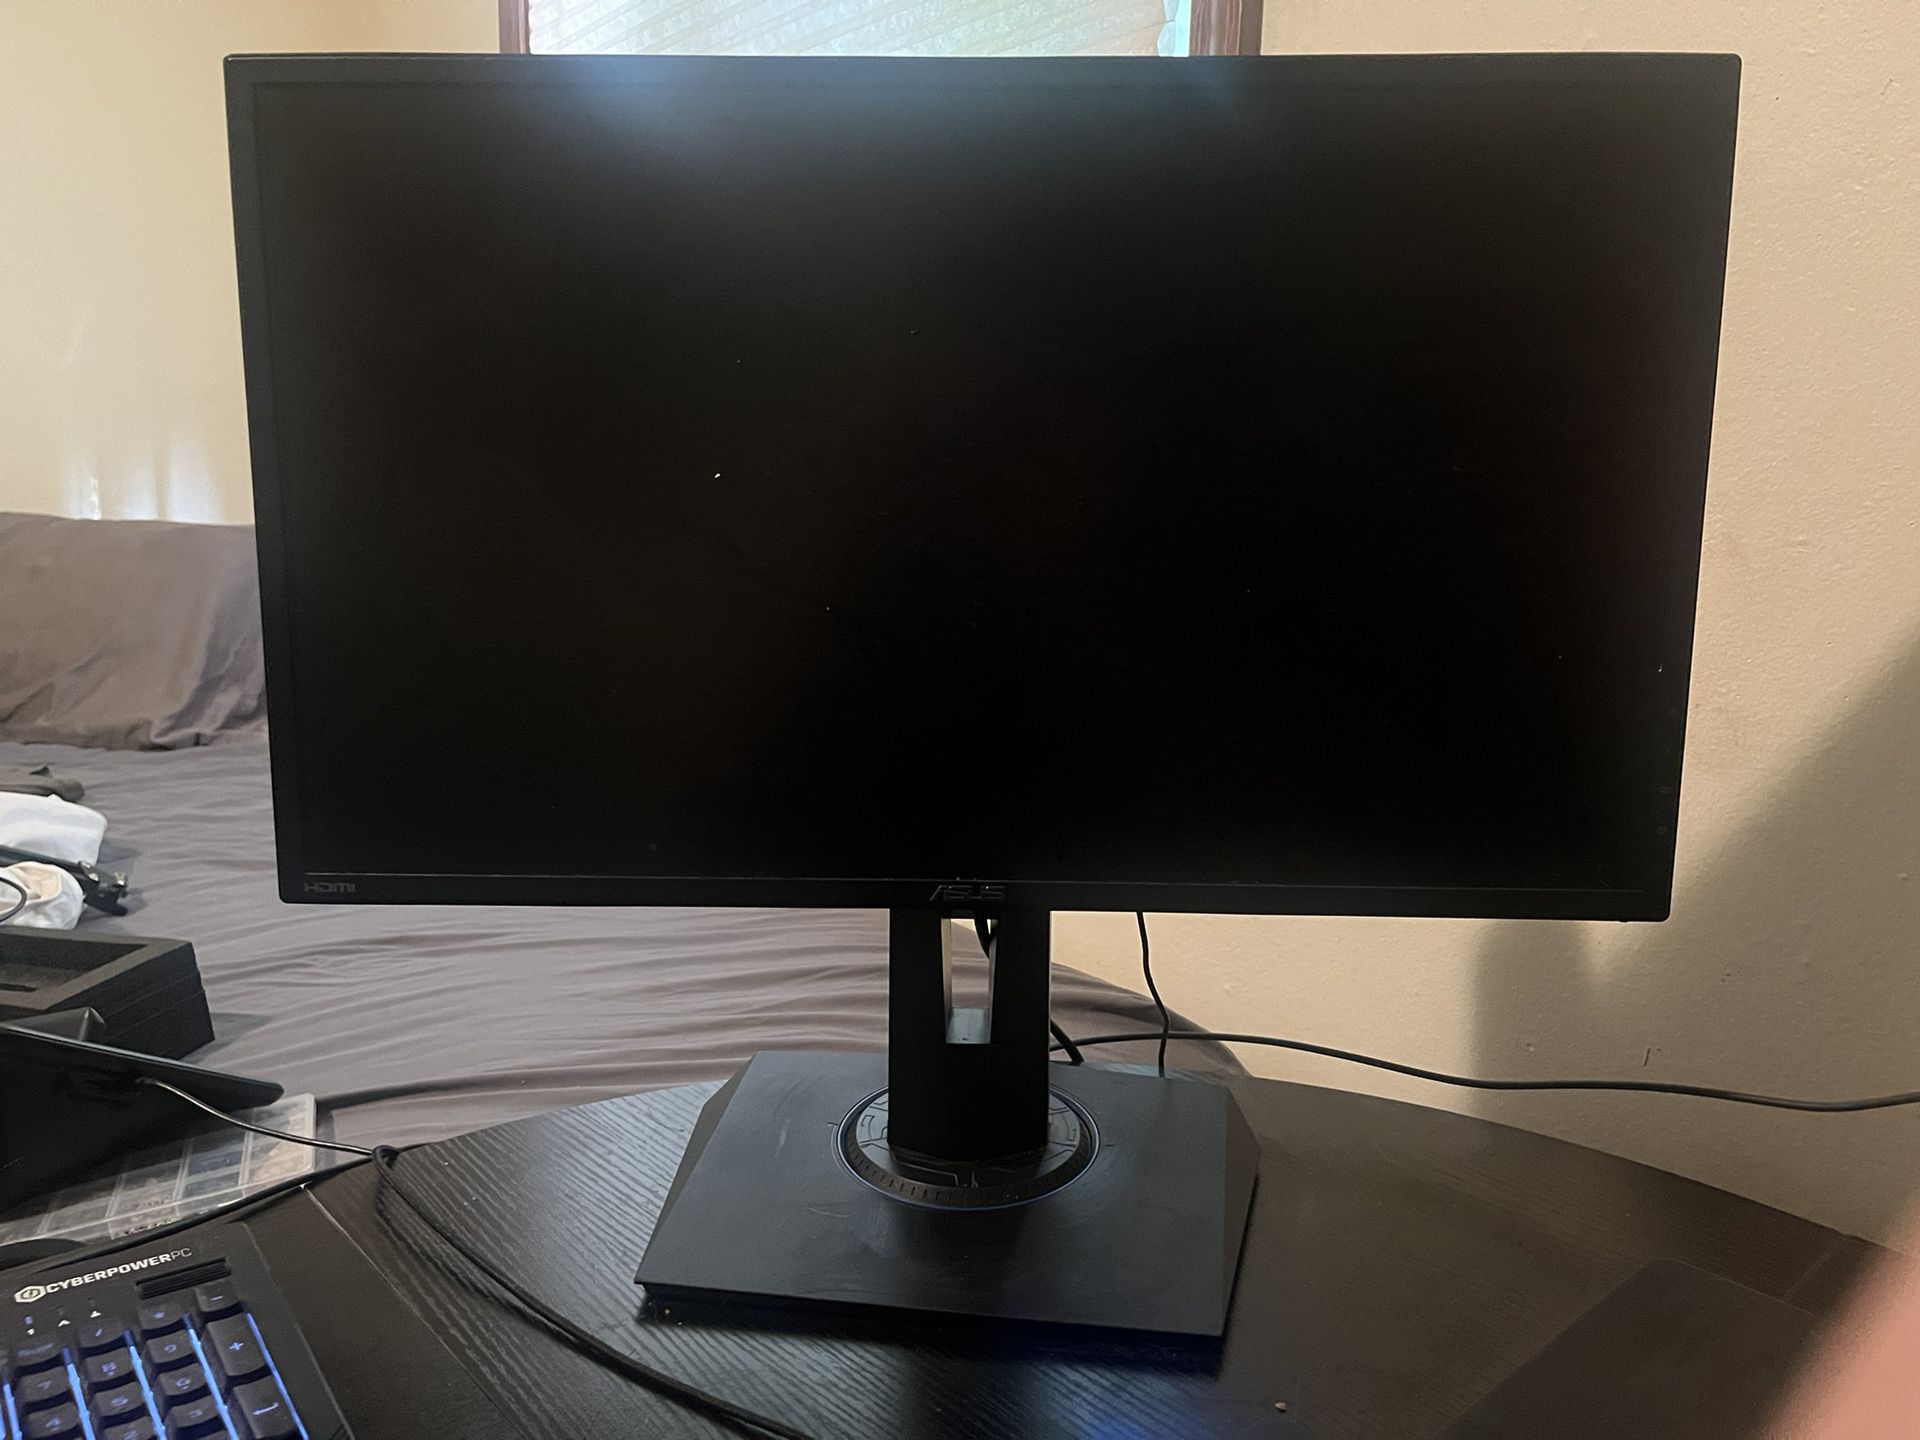 Monitor, Keyboard, Standalone Mic And Mouse And Mouse Pad